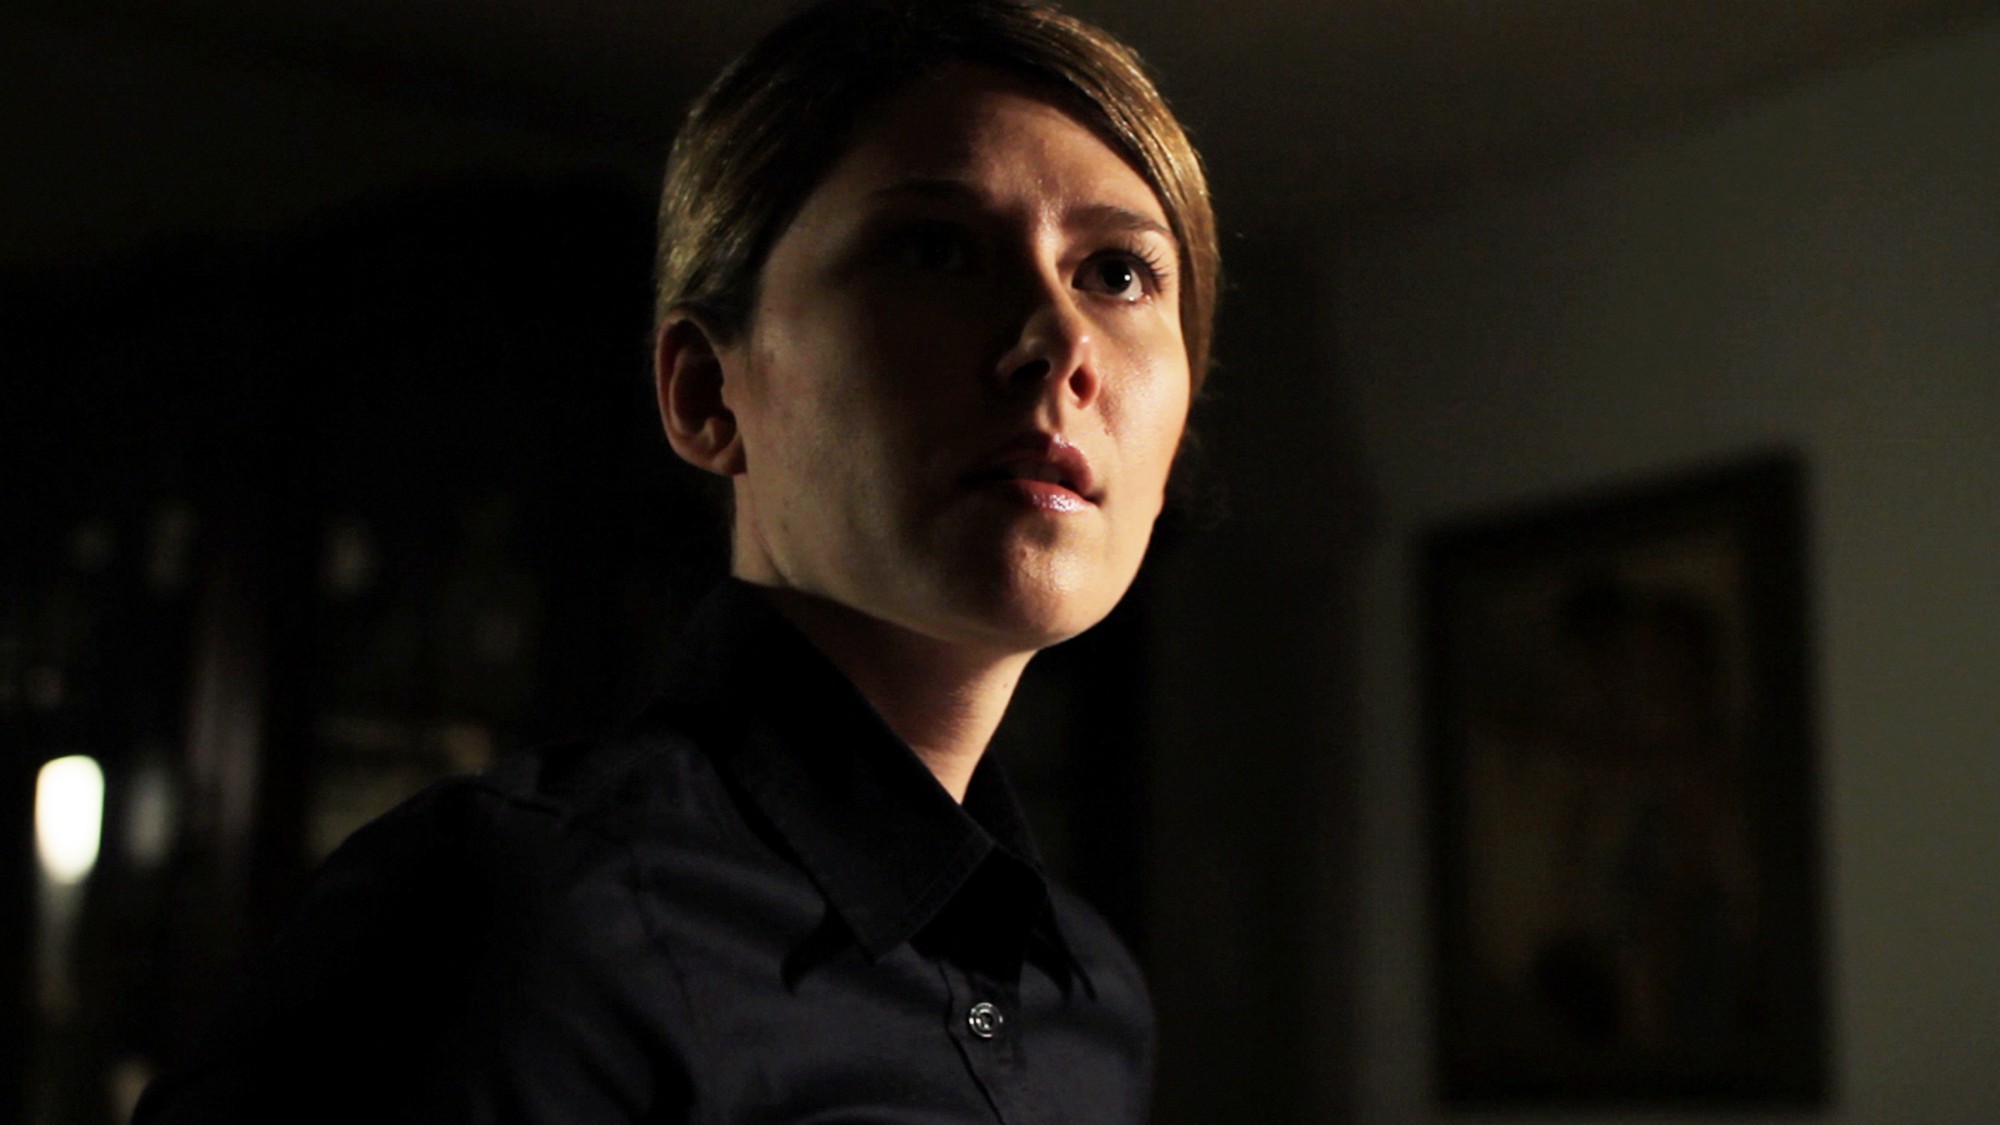 Jewel Staite stars as Anna in IFC Midnight's The Pact (2013)